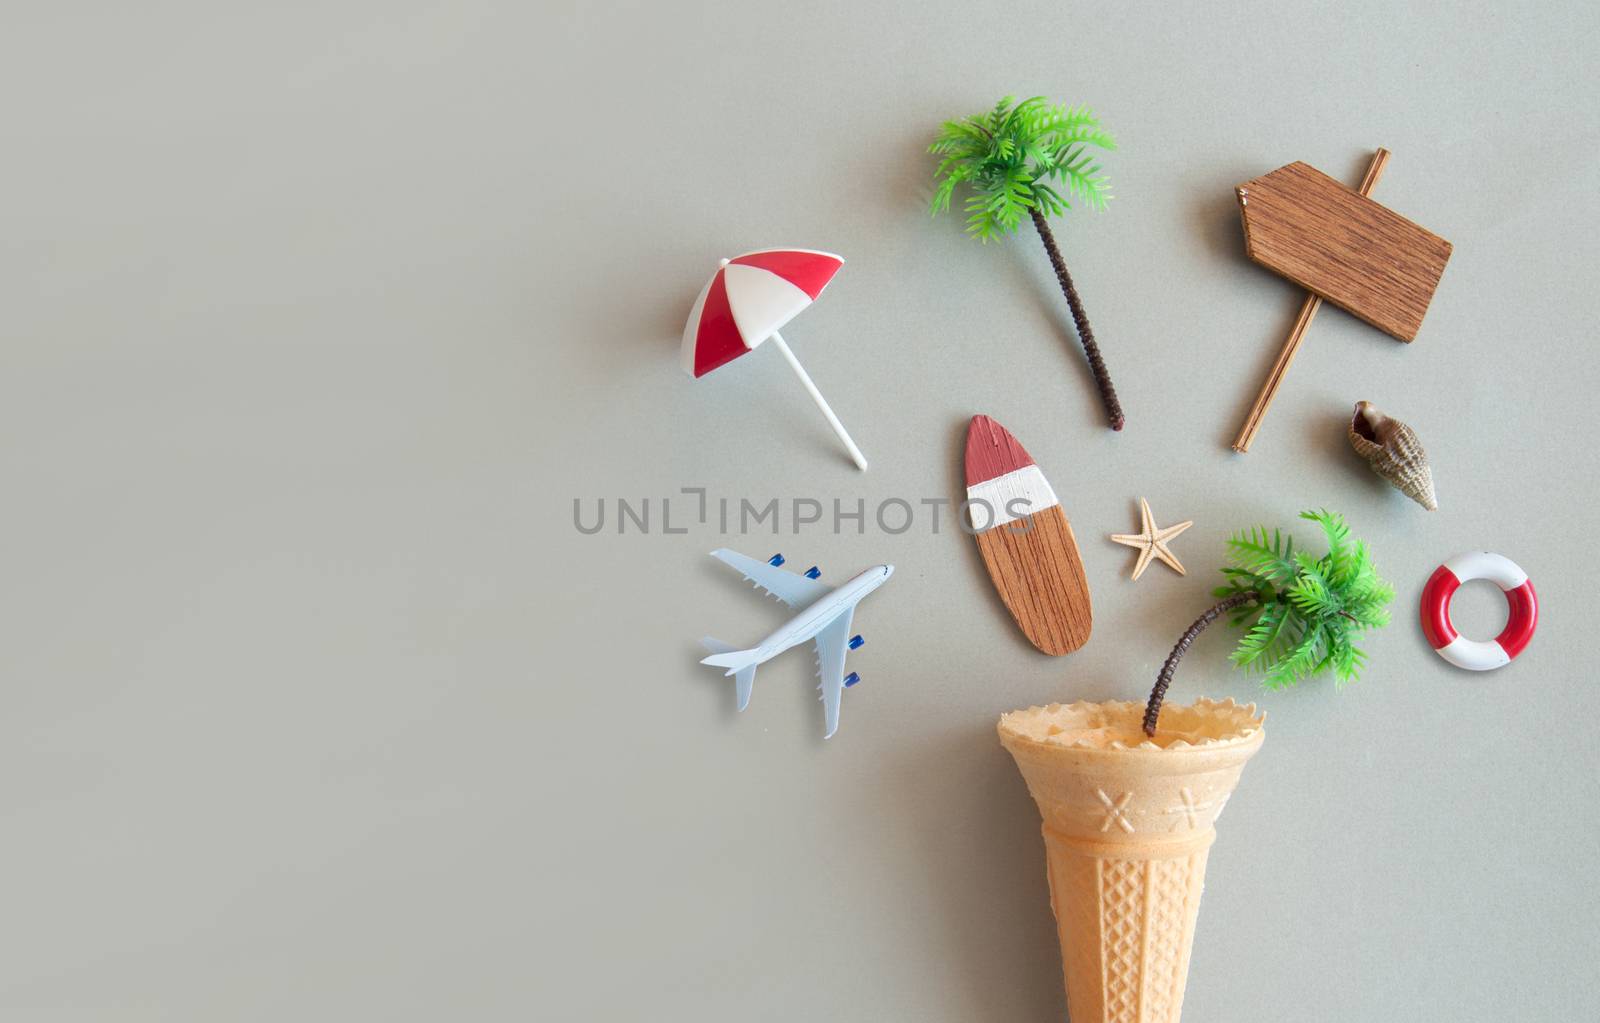 Icecream cone with various summer items including parasol, surfboard, miniature airplane and pine trees 